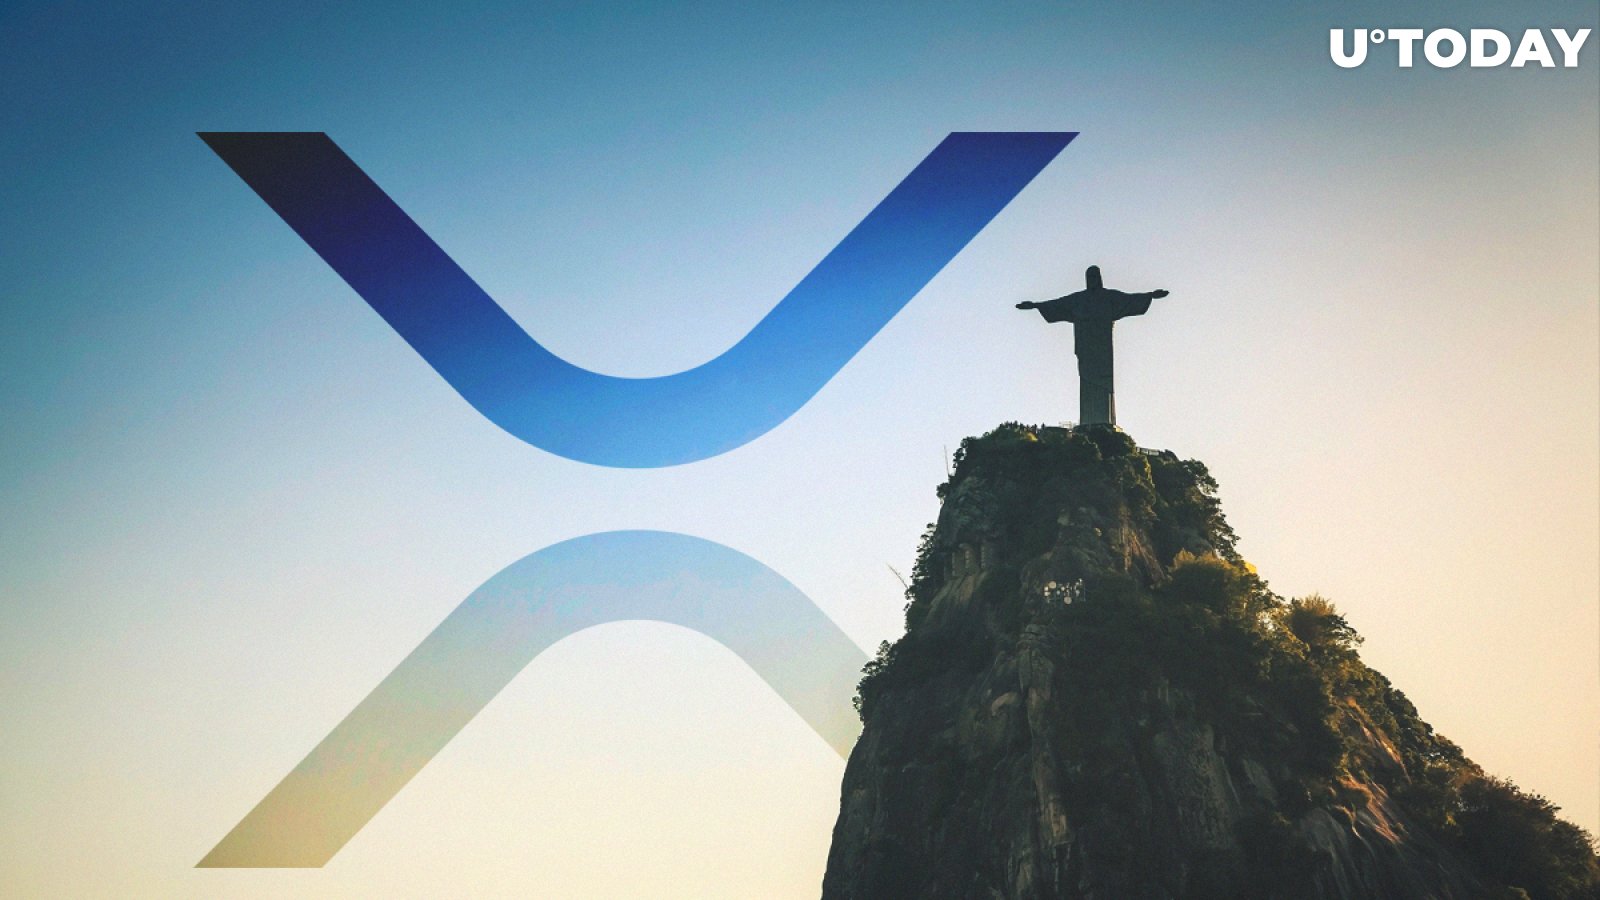 Ripple Aims at Wider XRP Expansion in Brazil in 2020